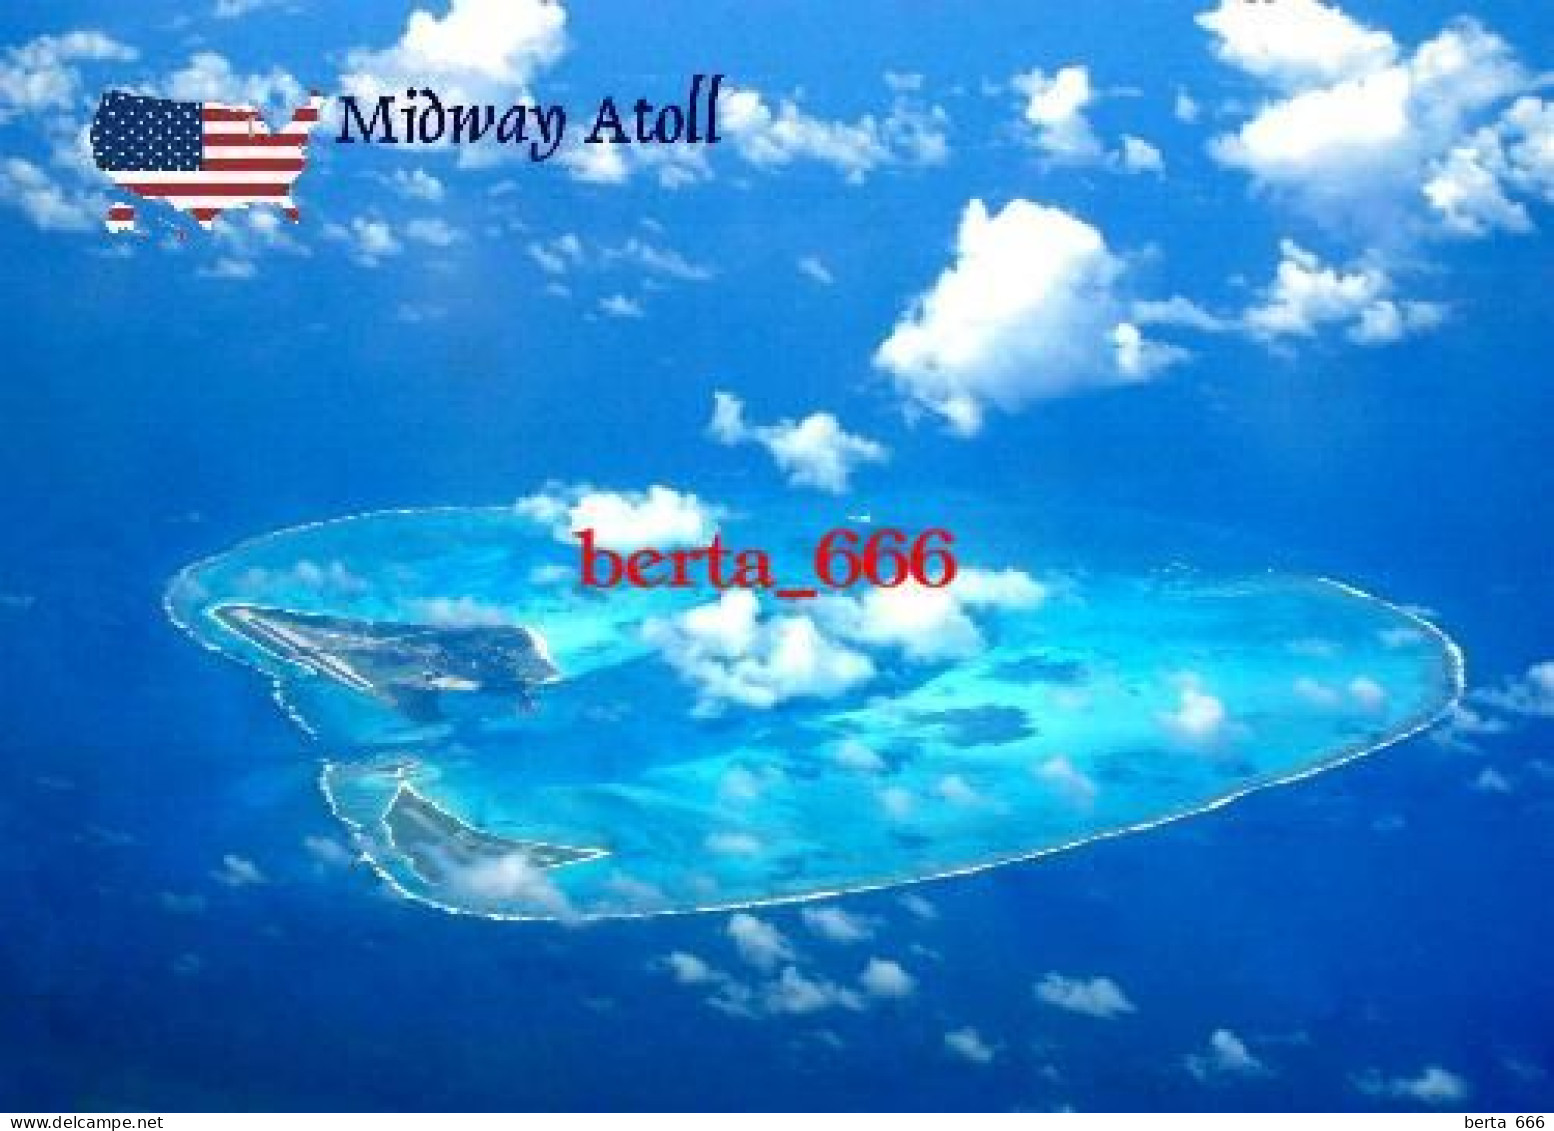 United States Midway Atoll Aerial View New Postcard - Midway